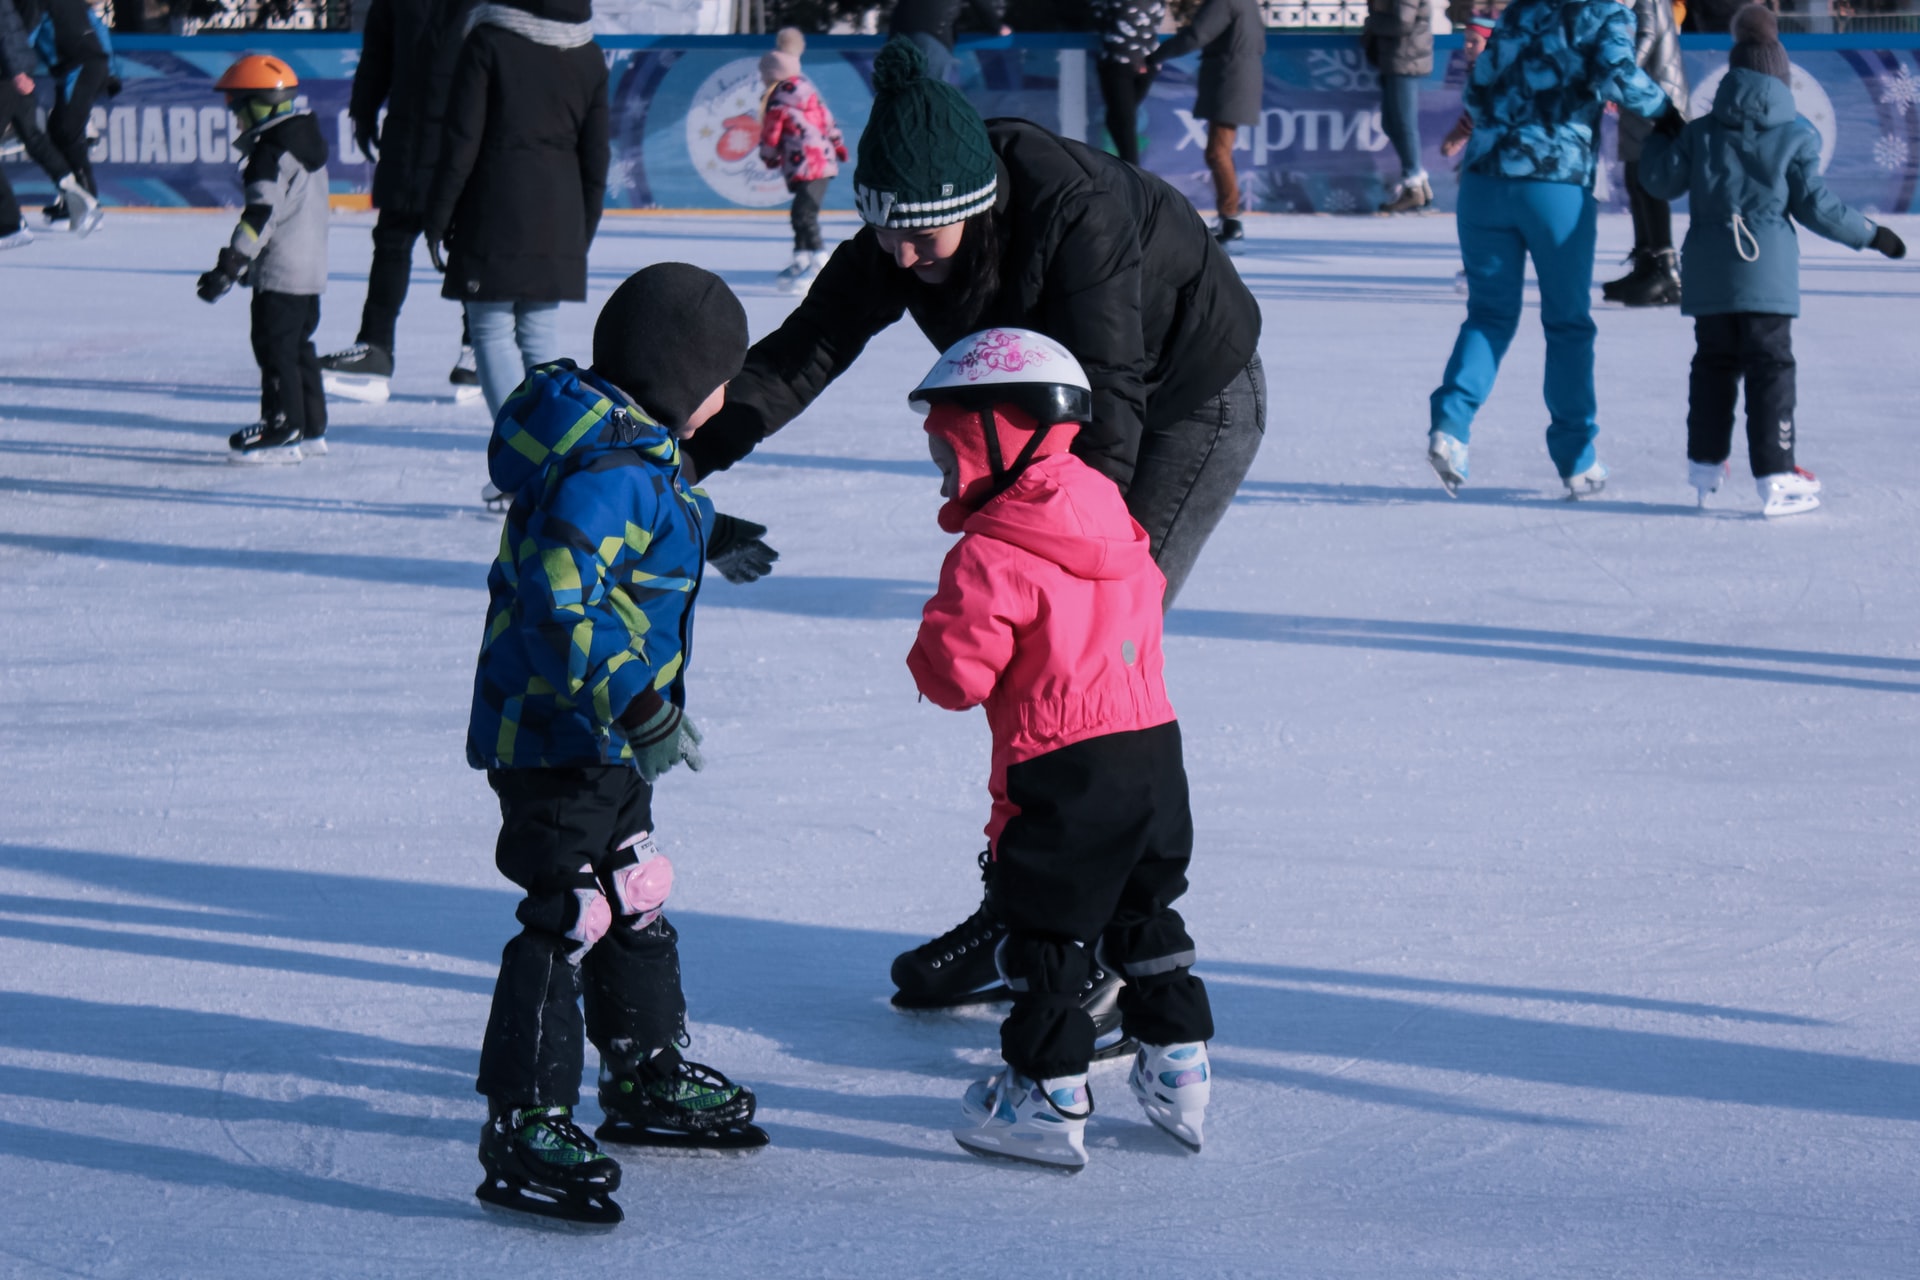 Practice Your Figure-Eights at the National Sculpture Garden’s Ice Skating Rink